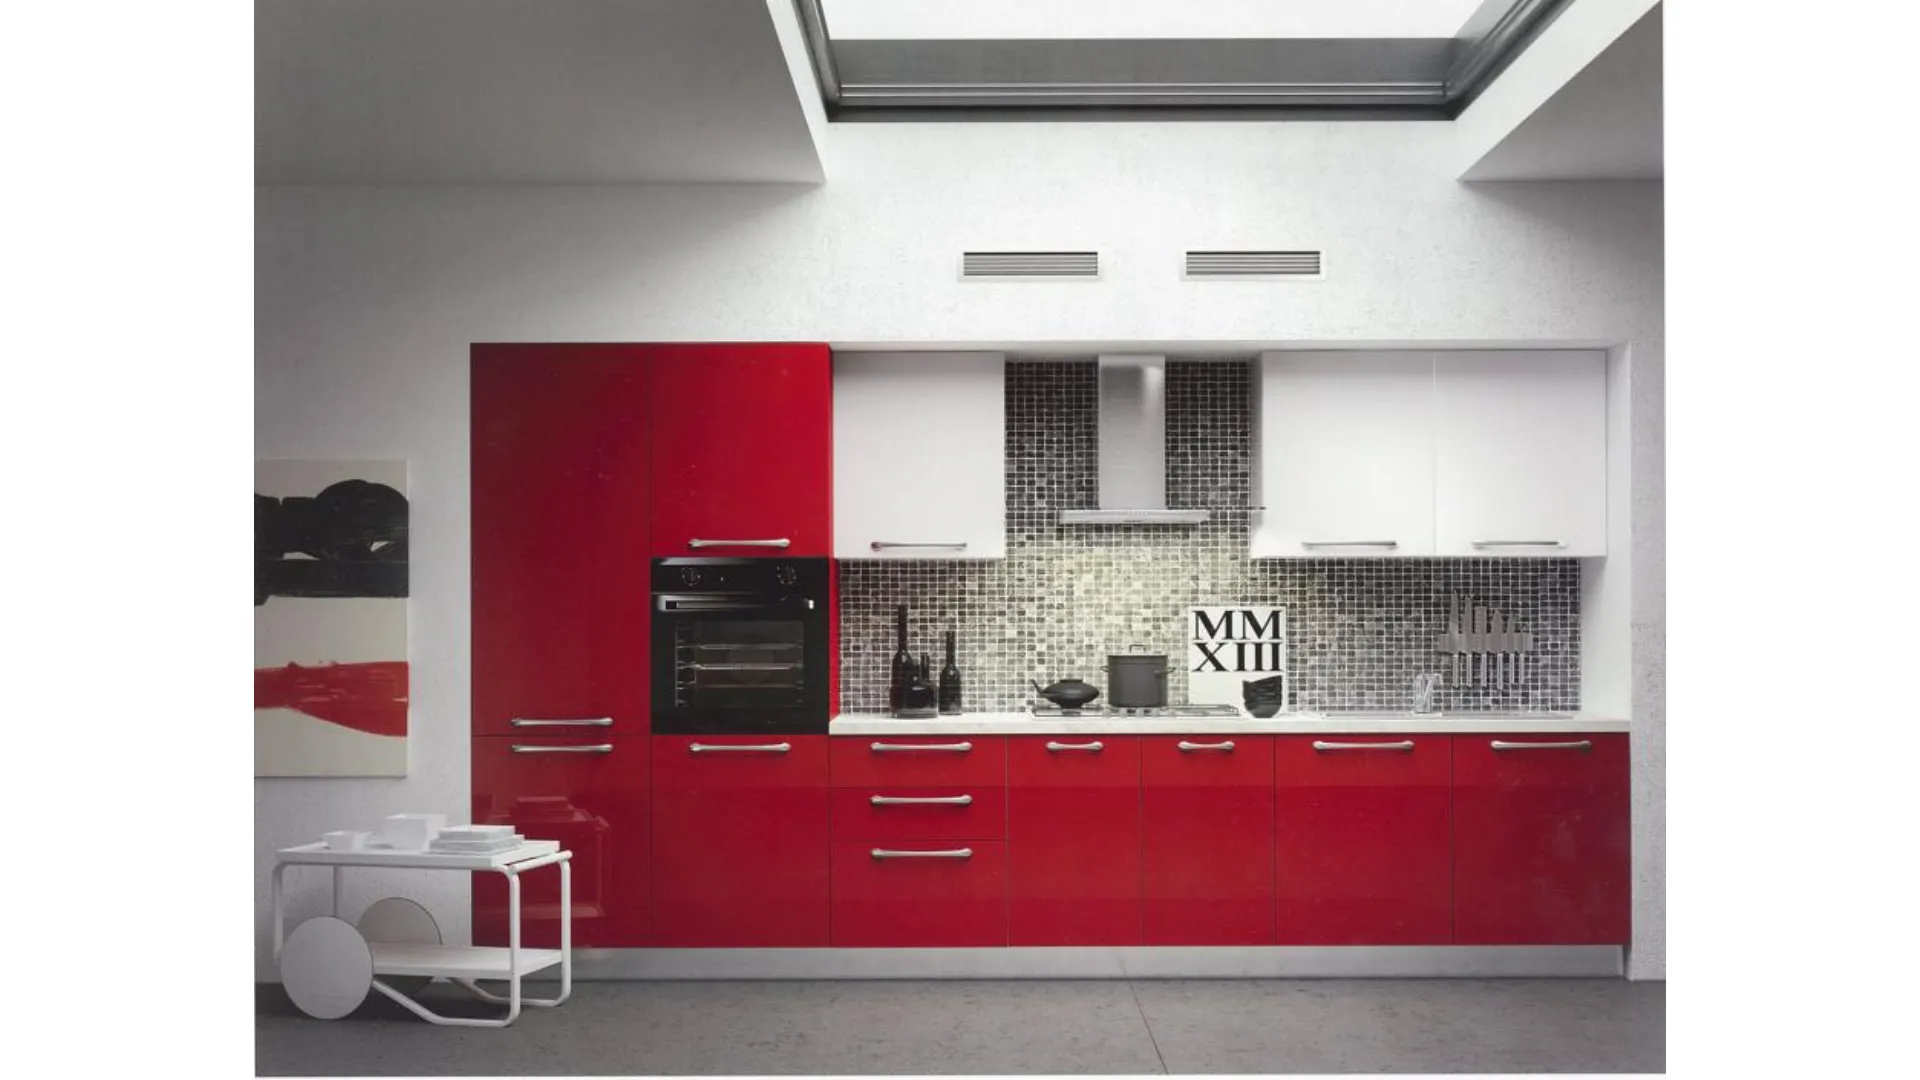 Modern lacquered kitchen glossy model Time of the Arredo 3 kitchens collection.